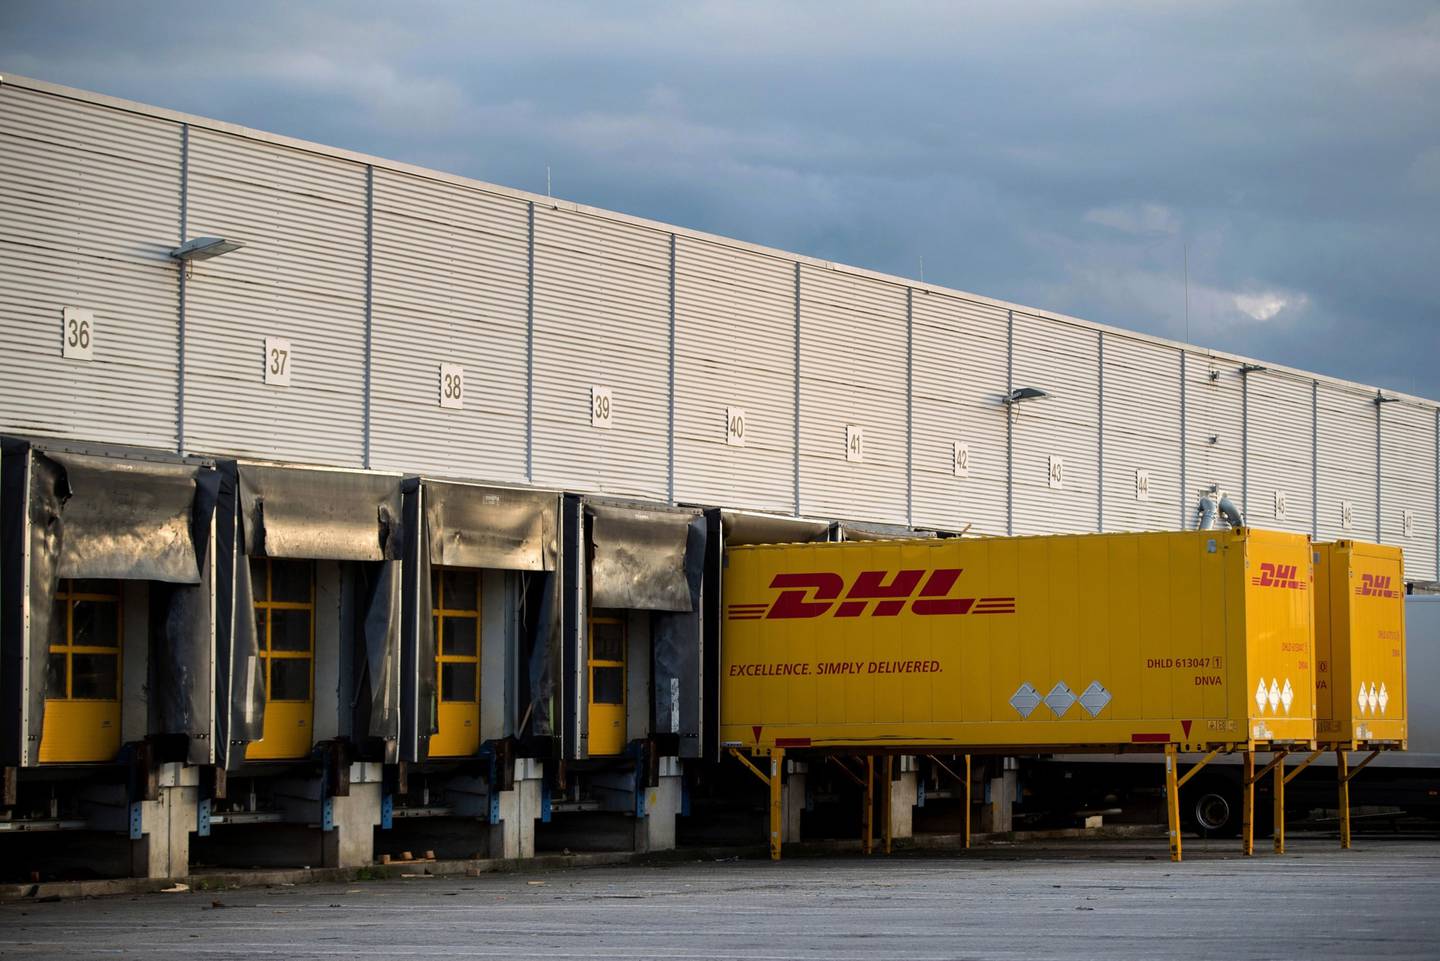 DHL delivery wagons in the loading bay at a Deutsche Post AG sorting office in Berlin, Germany.